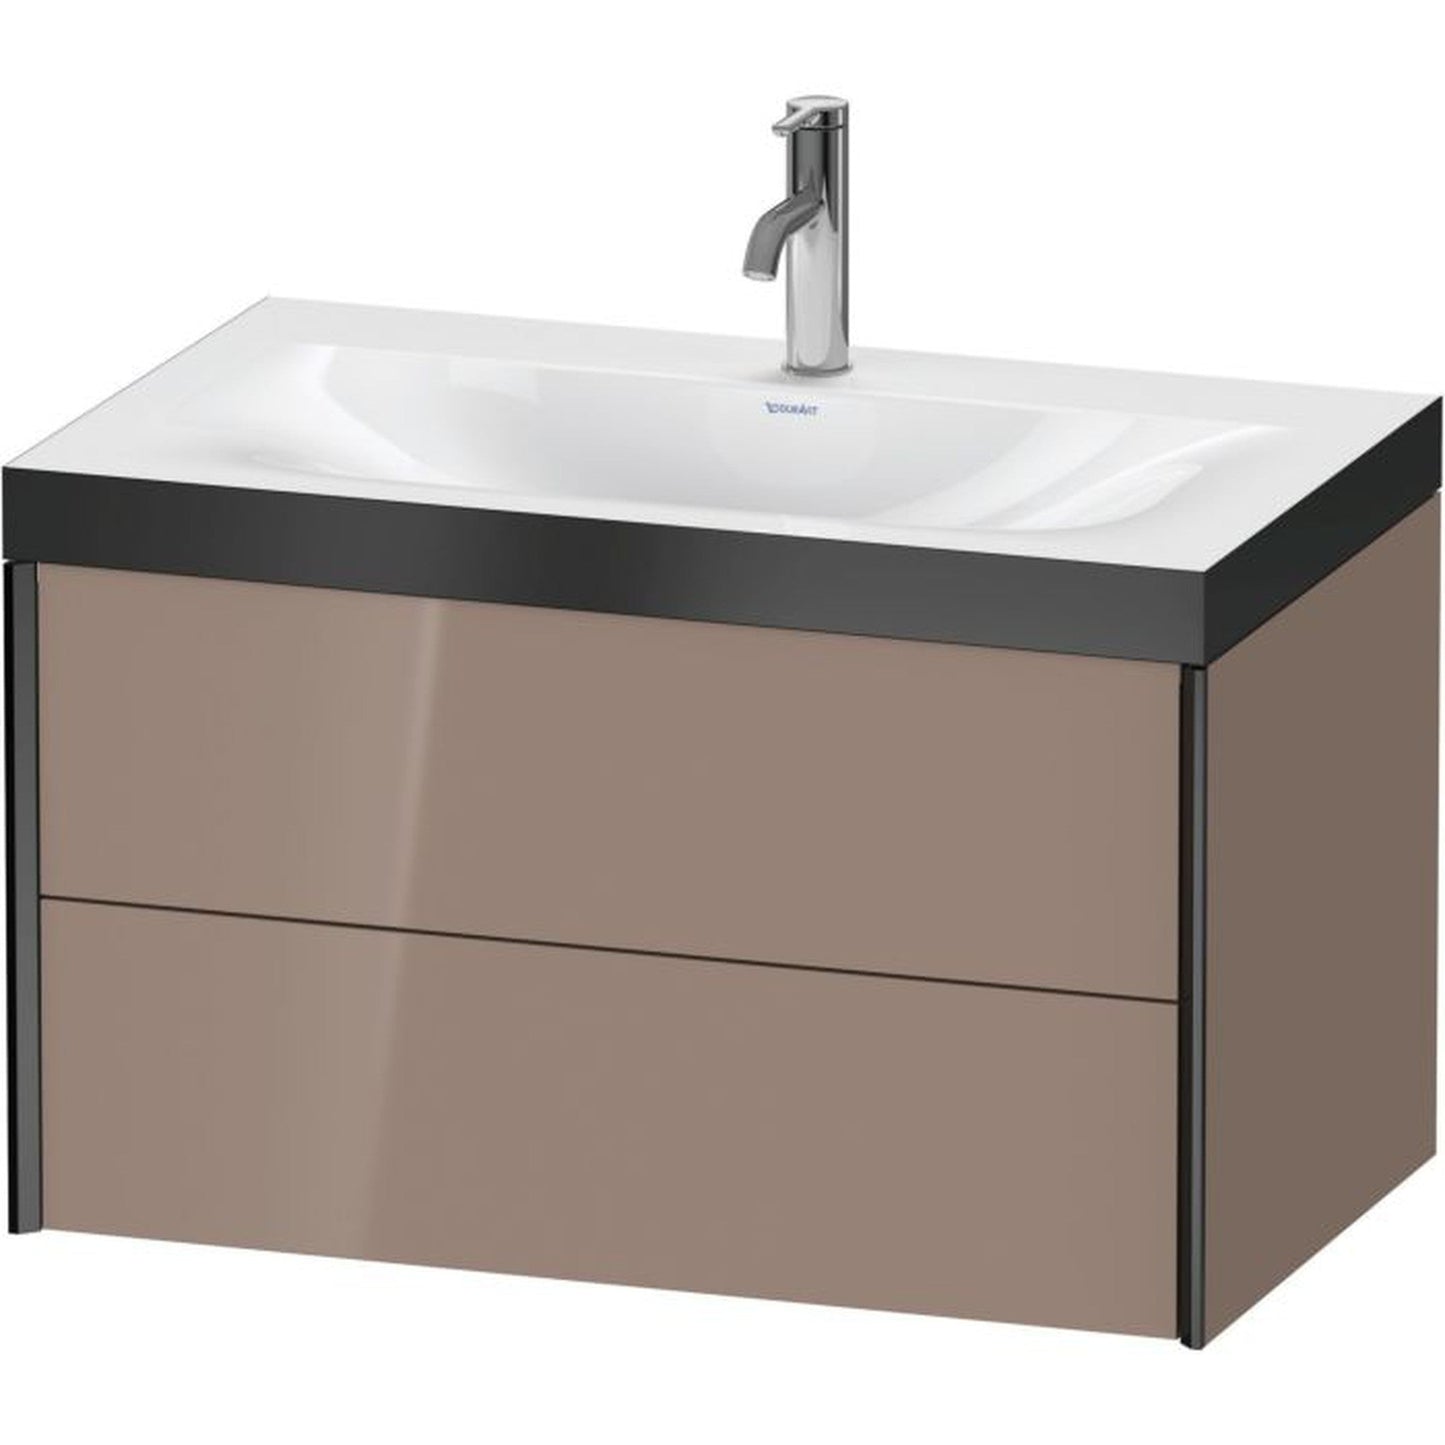 Duravit Xviu 31" x 20" x 19" Two Drawer C-Bonded Wall-Mount Vanity Kit With One Tap Hole, Cappuccino (XV4615OB286P)